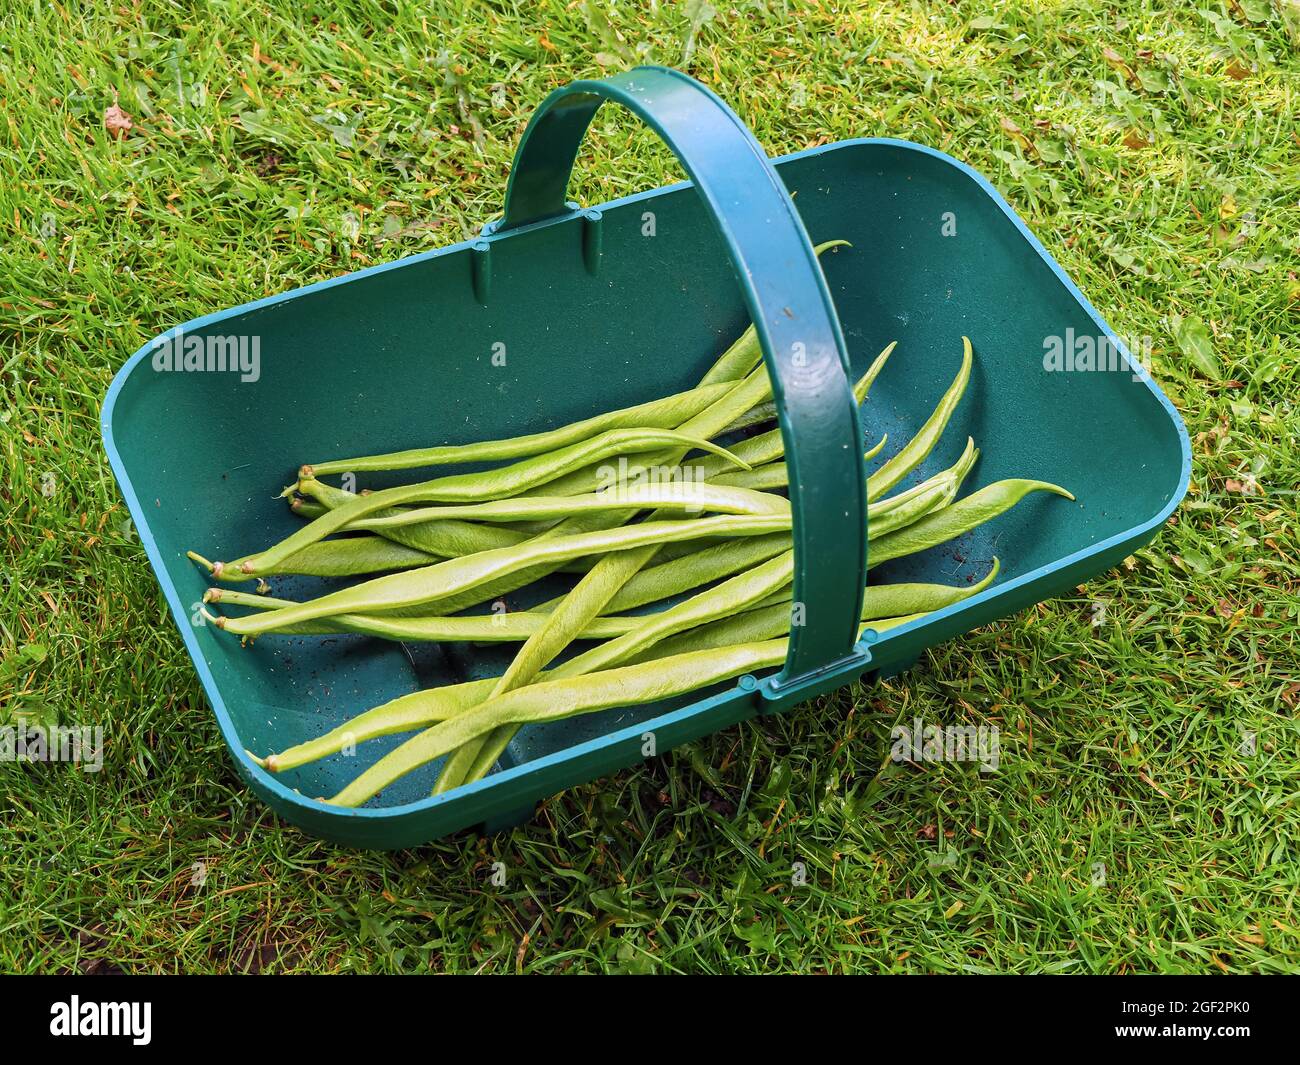 Runner beans in a plastic garden trug on a grass lawn Stock Photo